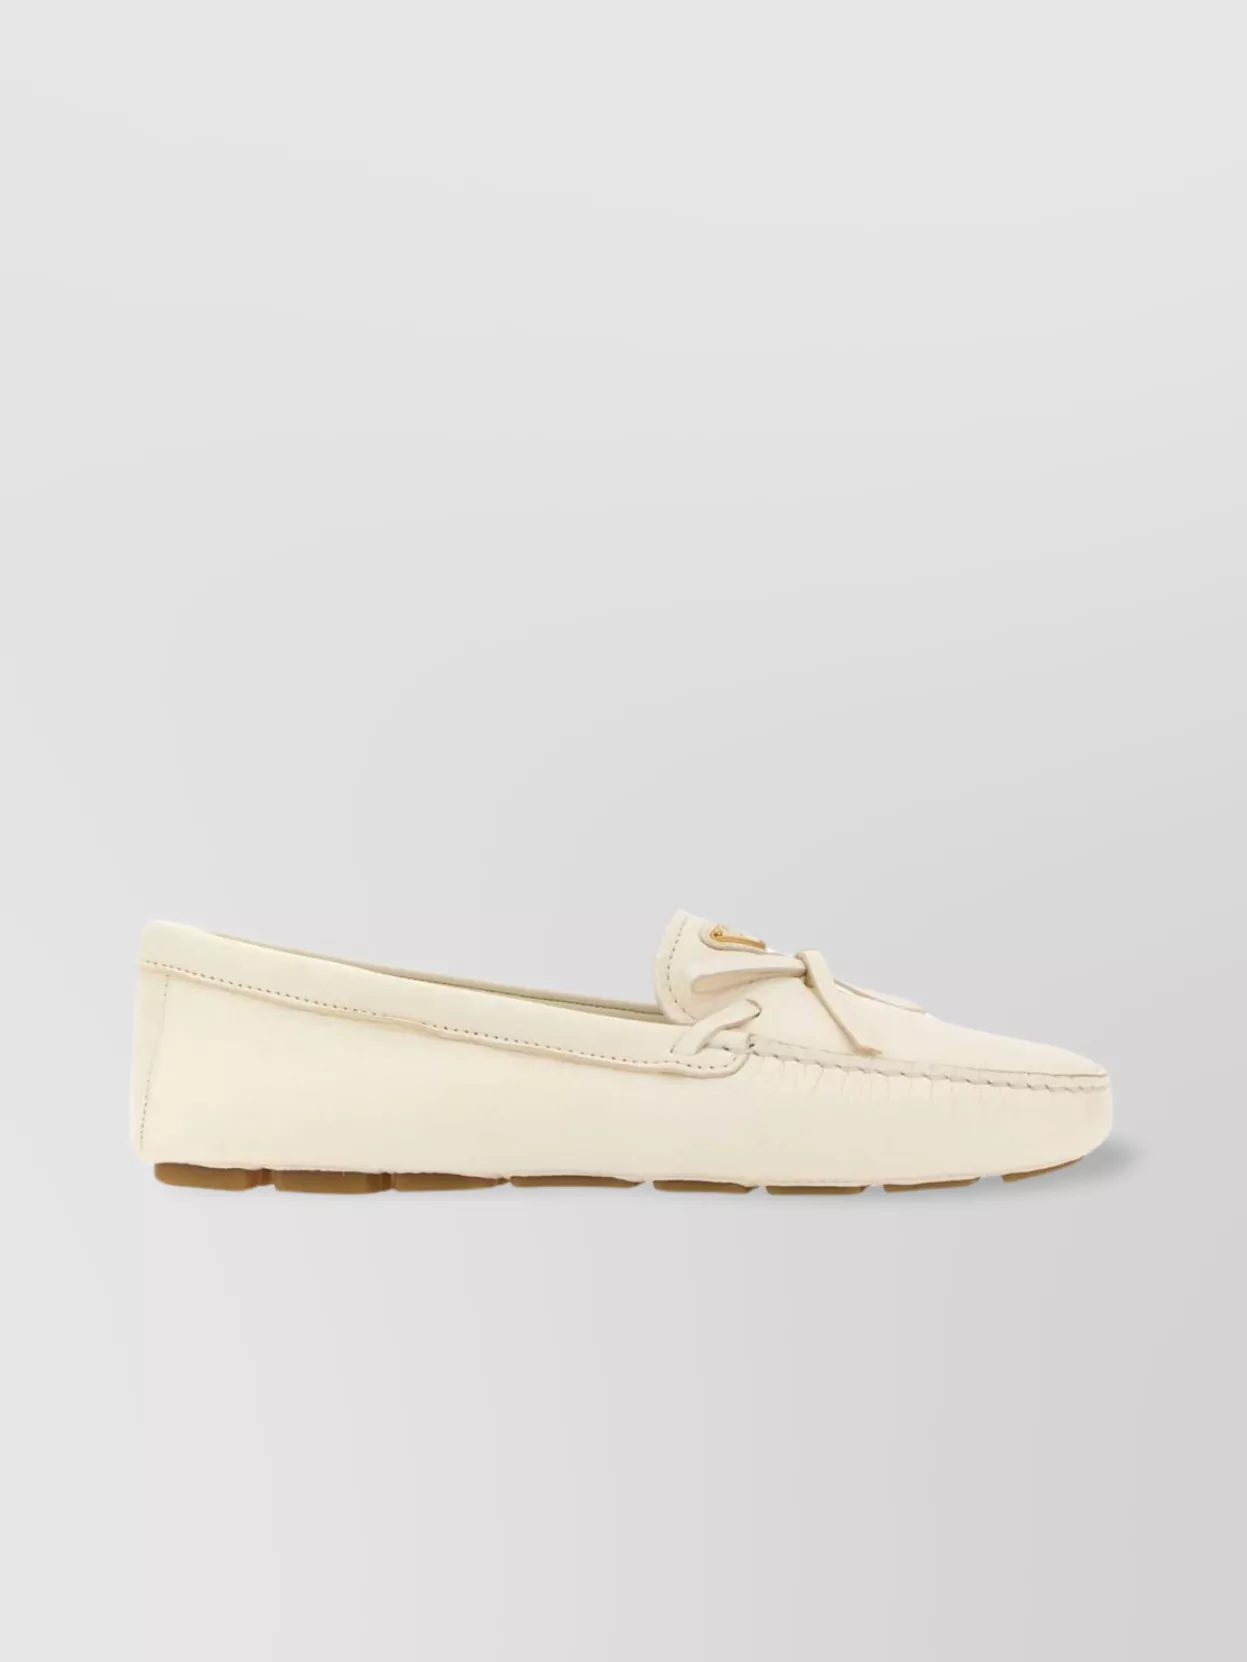 PRADA LEATHER LOAFERS WITH TASSEL AND STITCH DETAILING